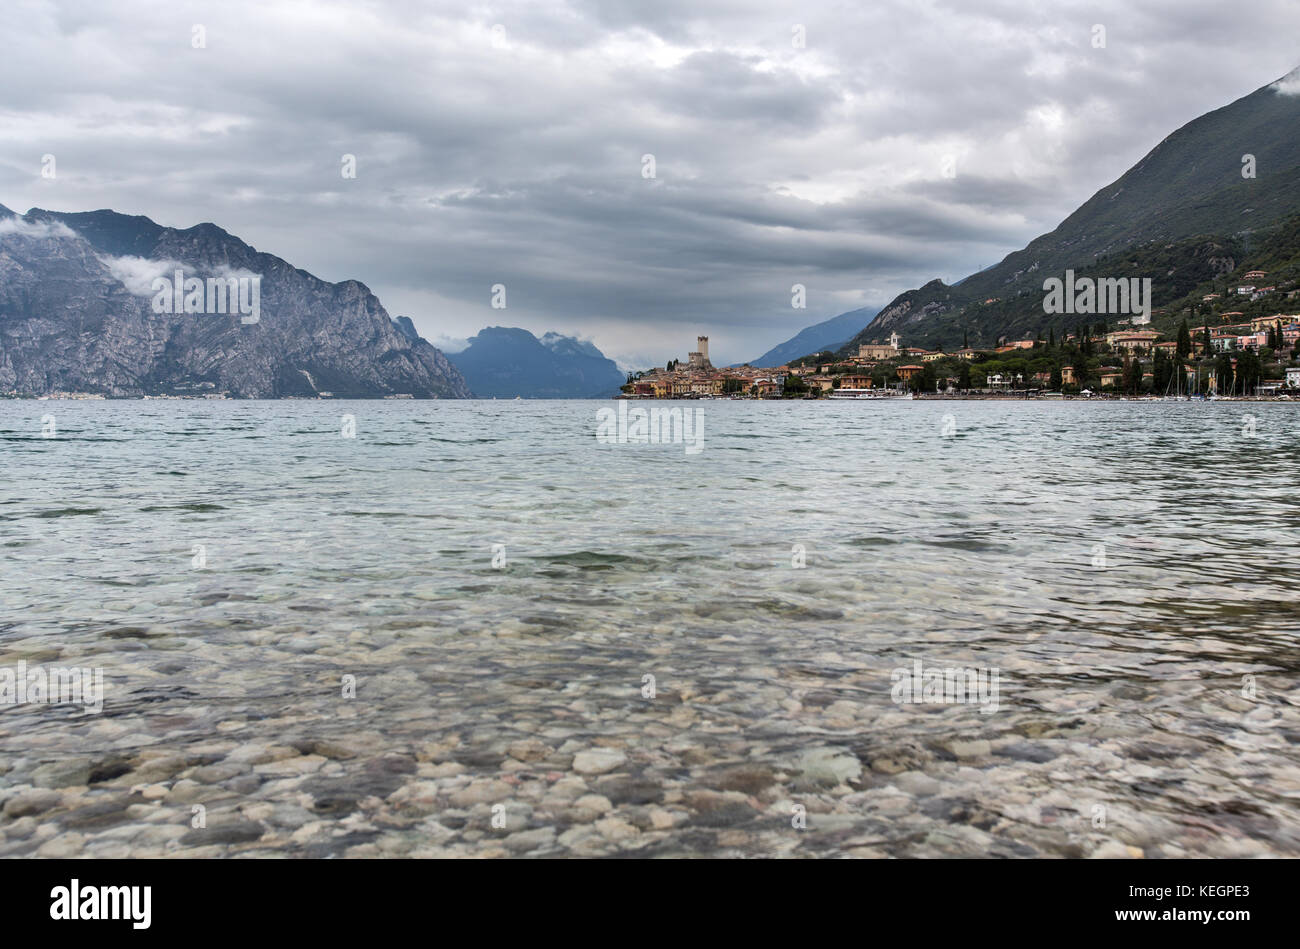 Town of Malcesine, Lake Garda, Italy. Picturesque view of Lake Garda with the town on Malcesine in the background. Stock Photo